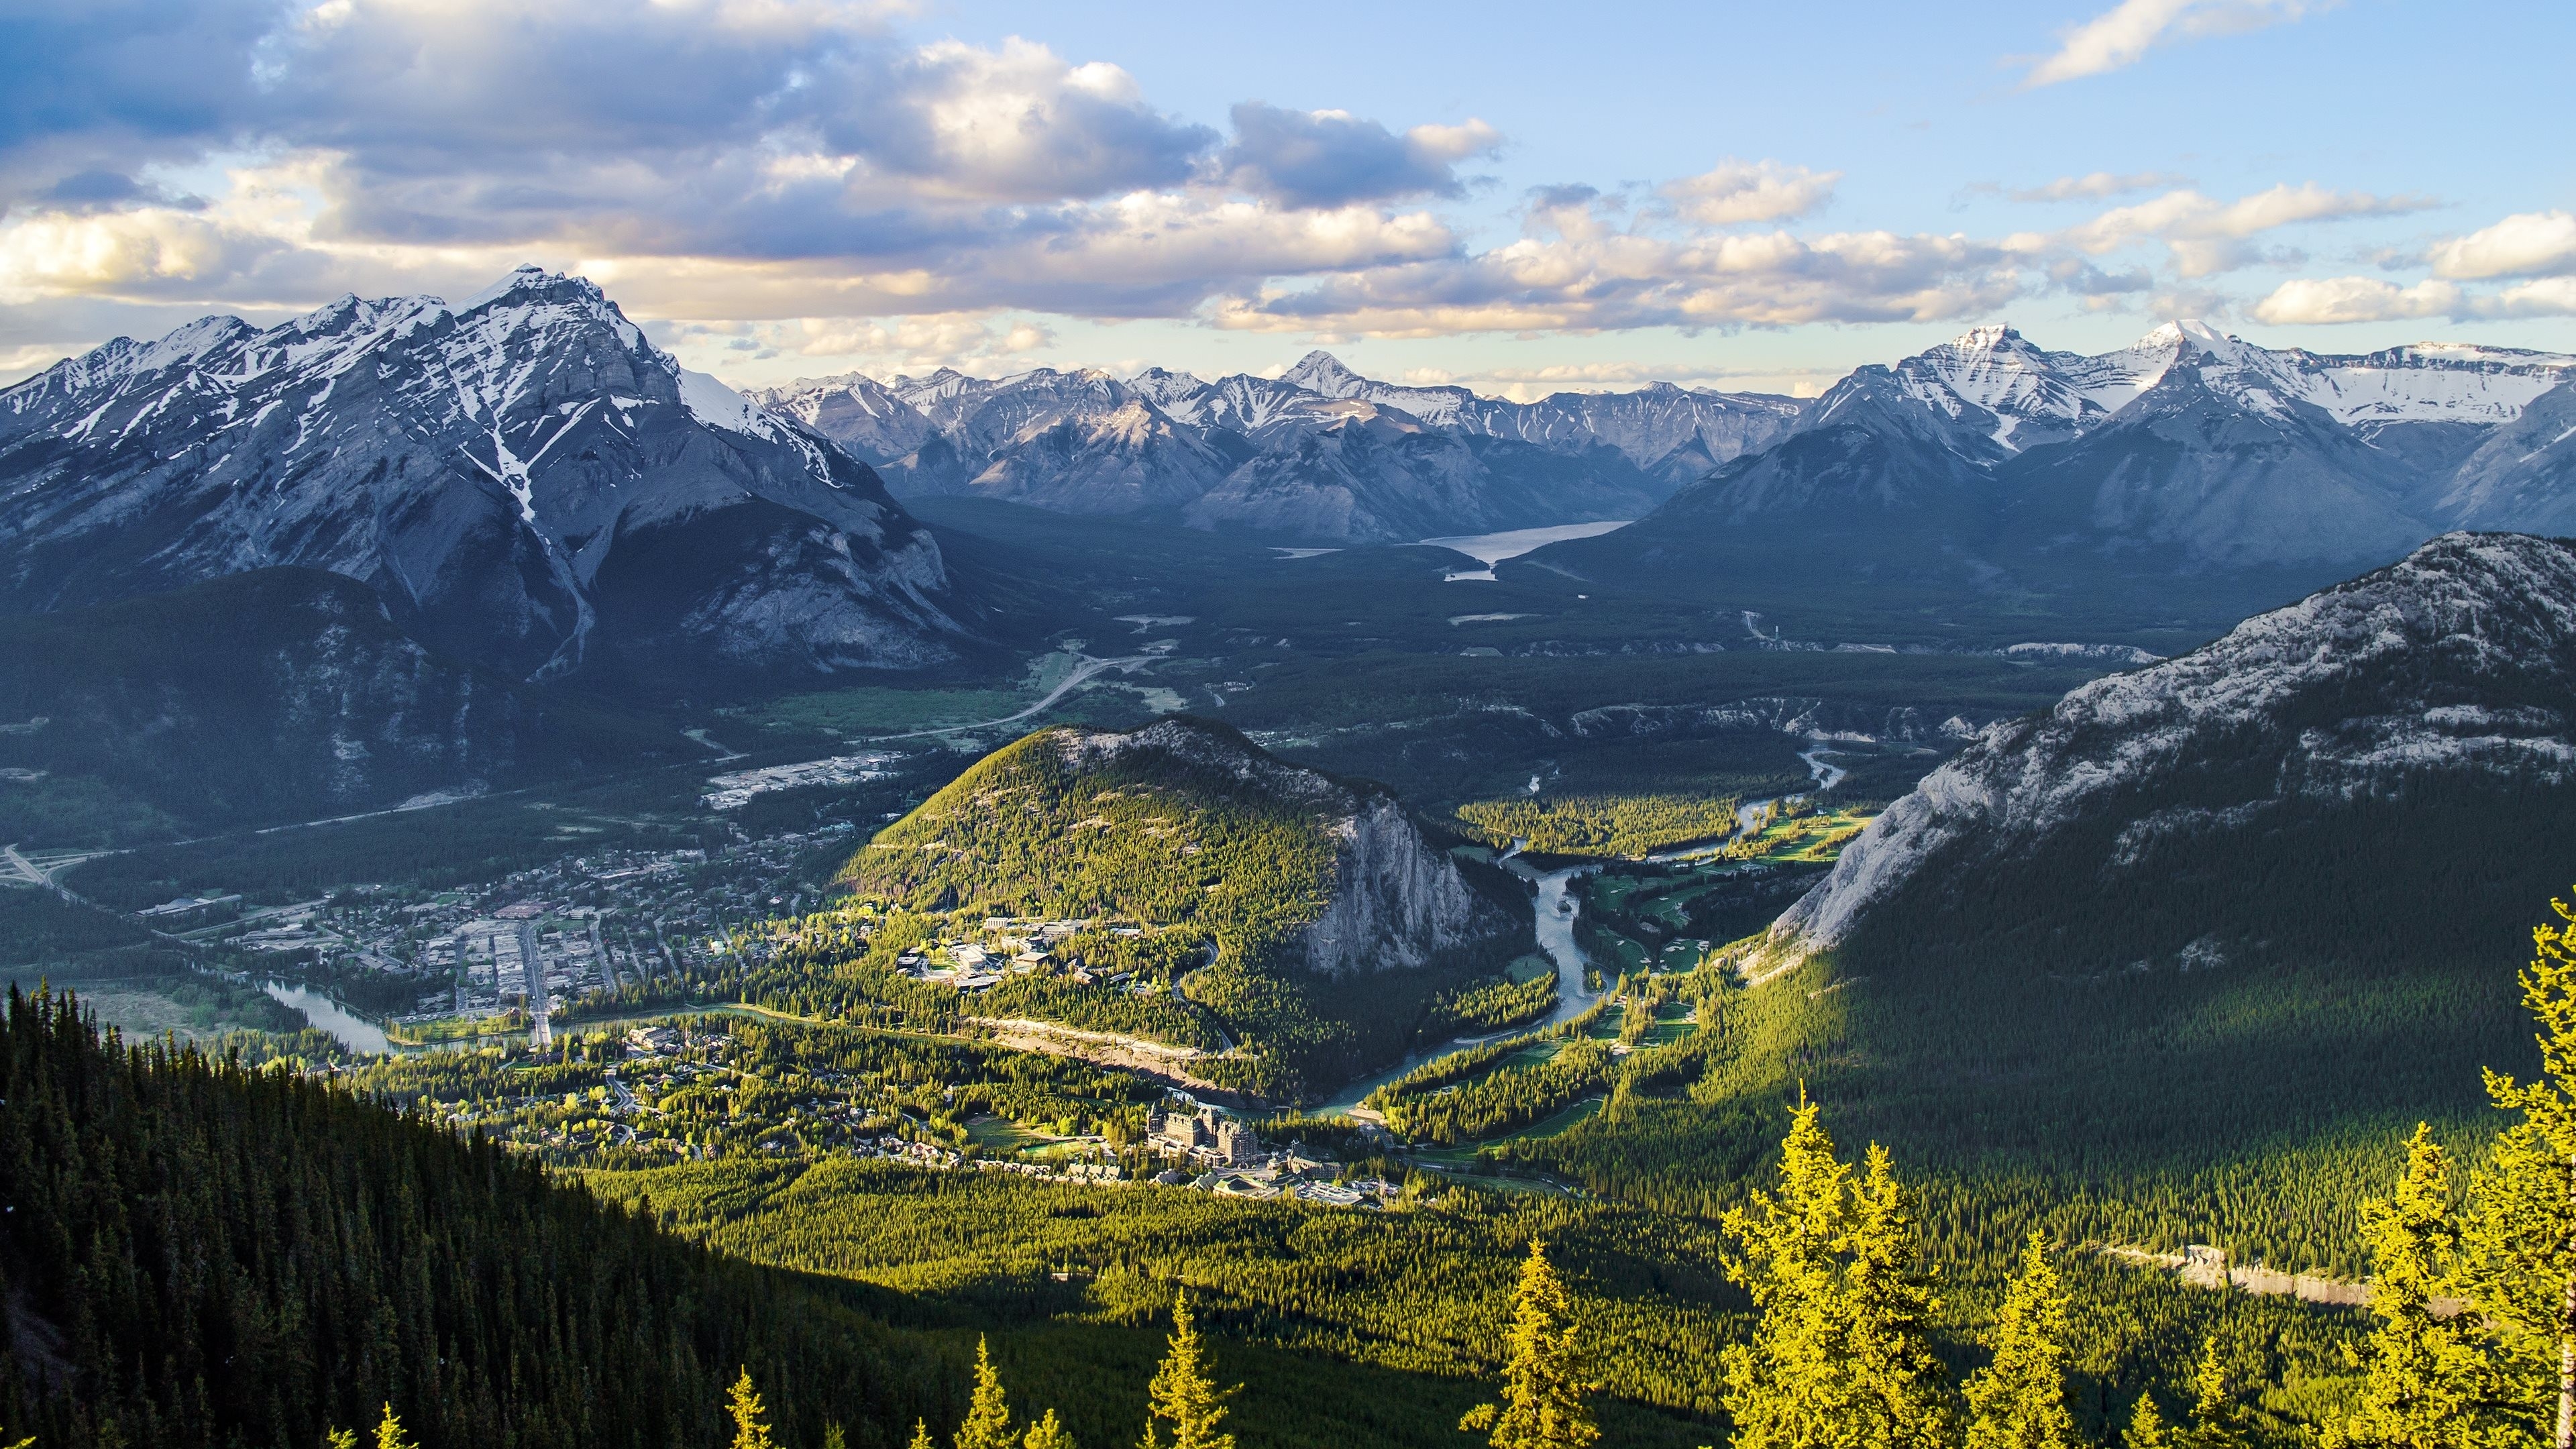 Wallpapers wallpaper banff national park picturesque mountains on the desktop